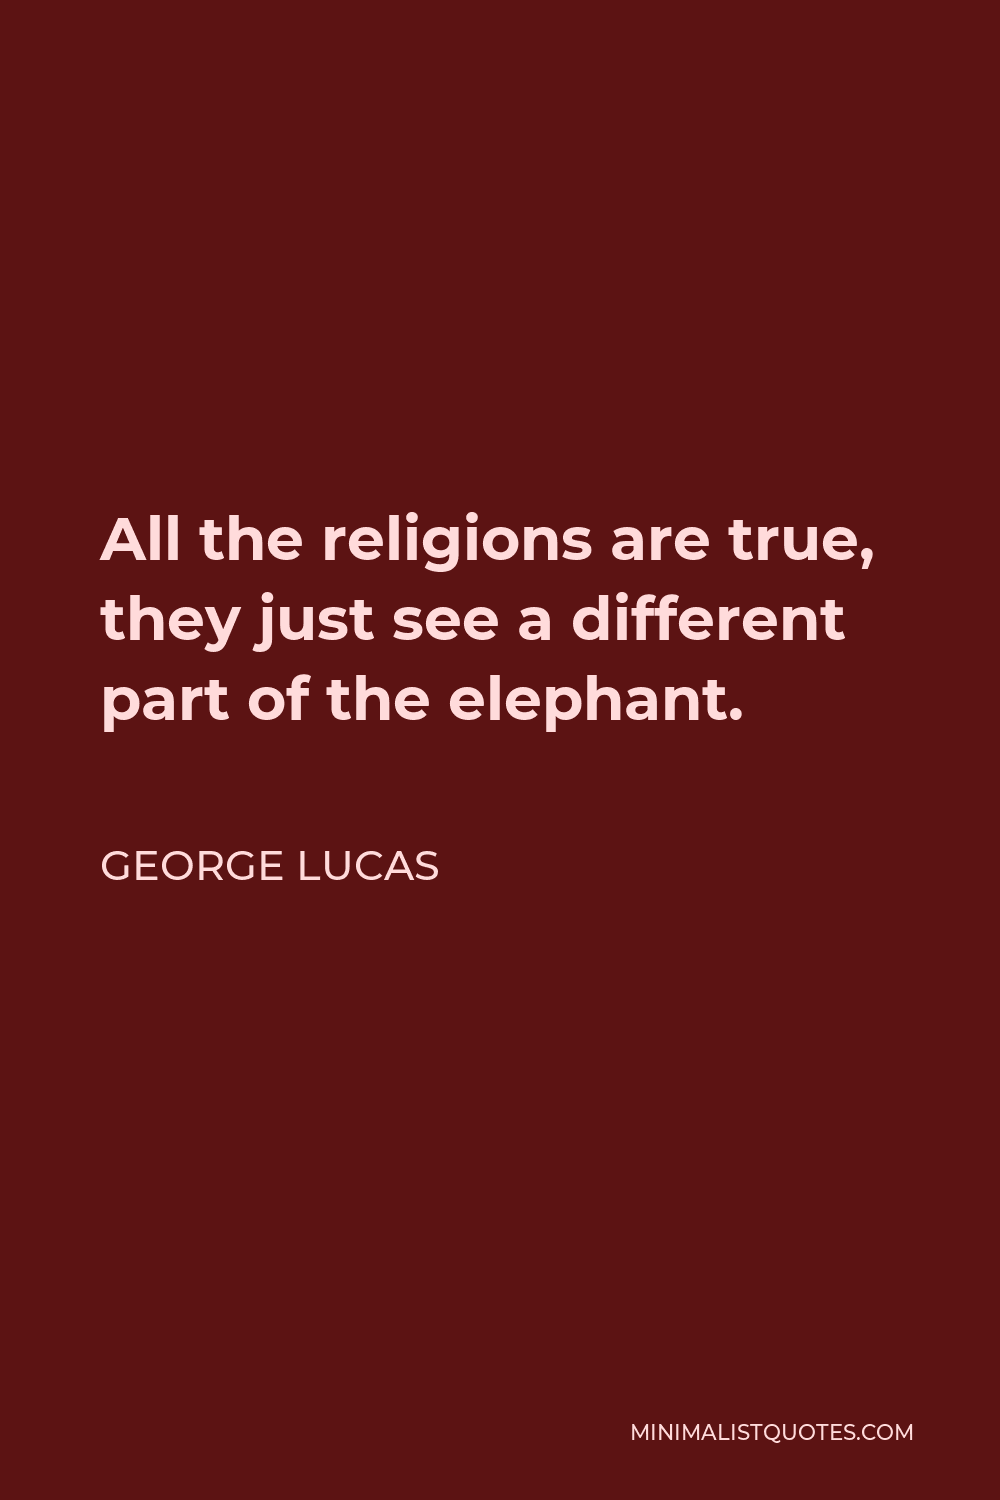 George Lucas Quote - All the religions are true, they just see a different part of the elephant.